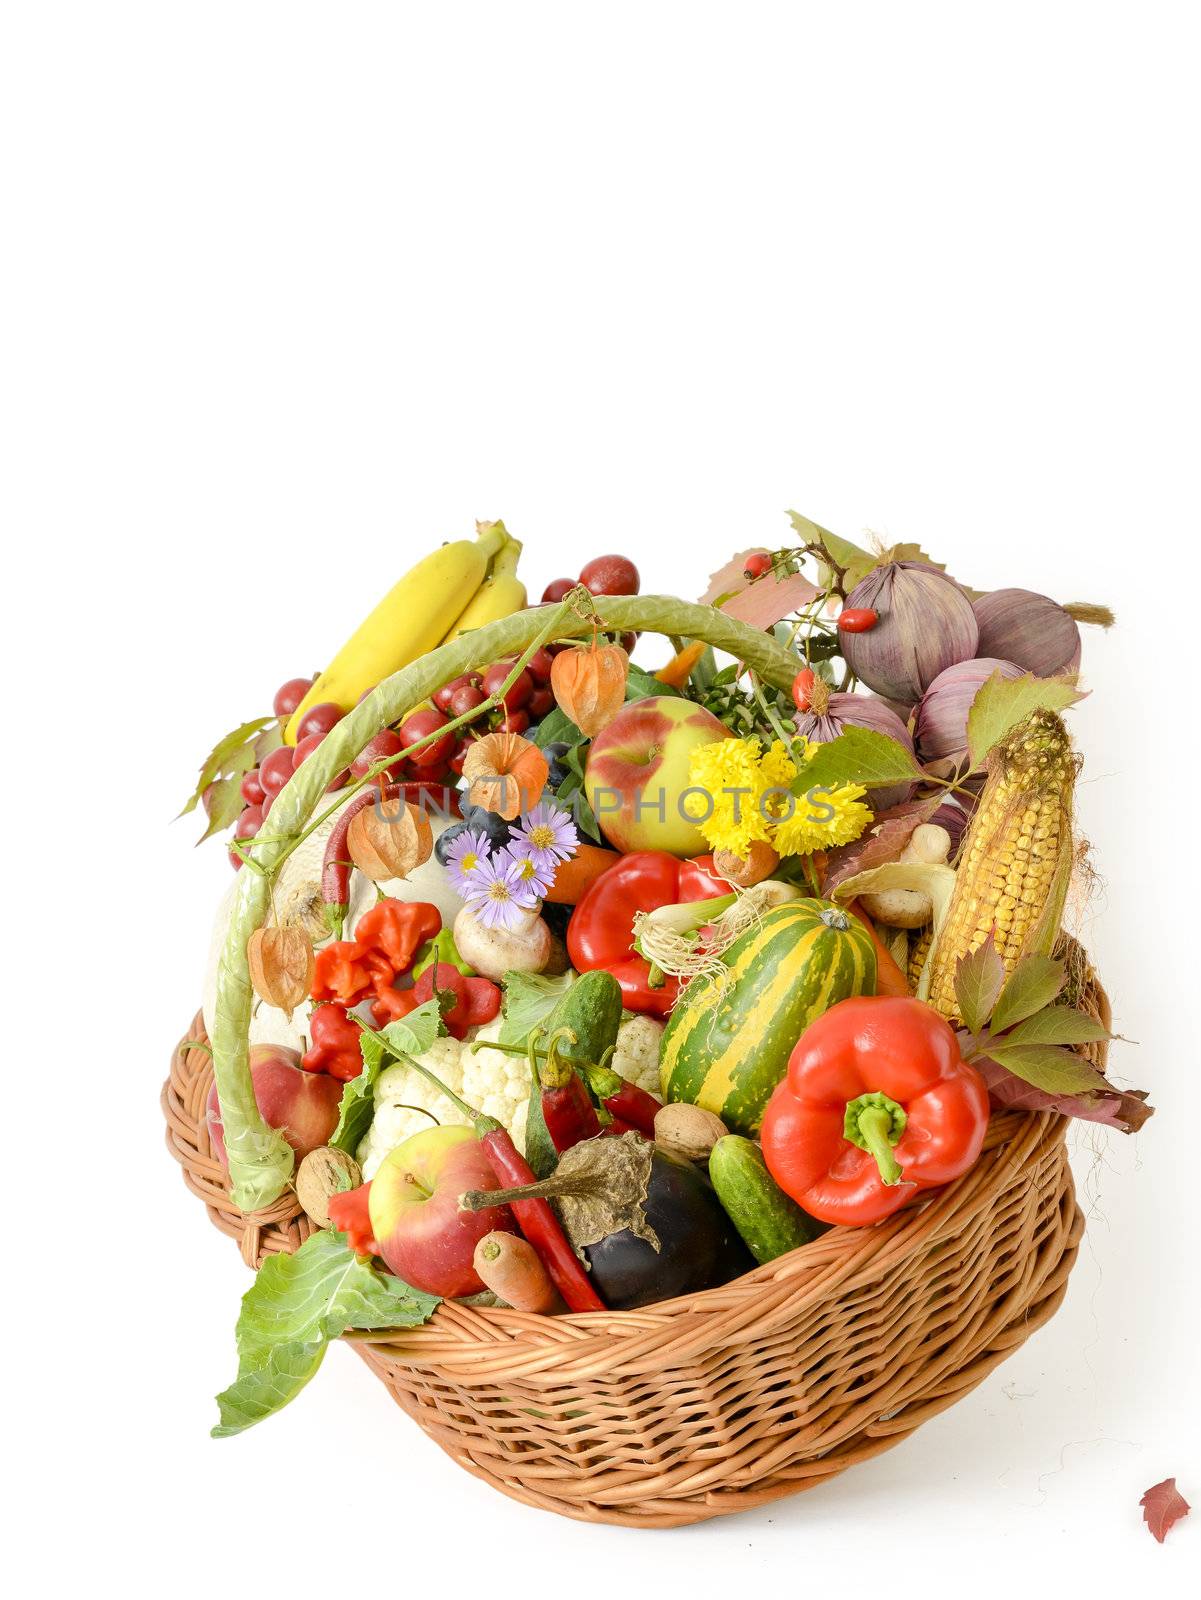 Variety of raw vegetables in wicker basket isolated on white background